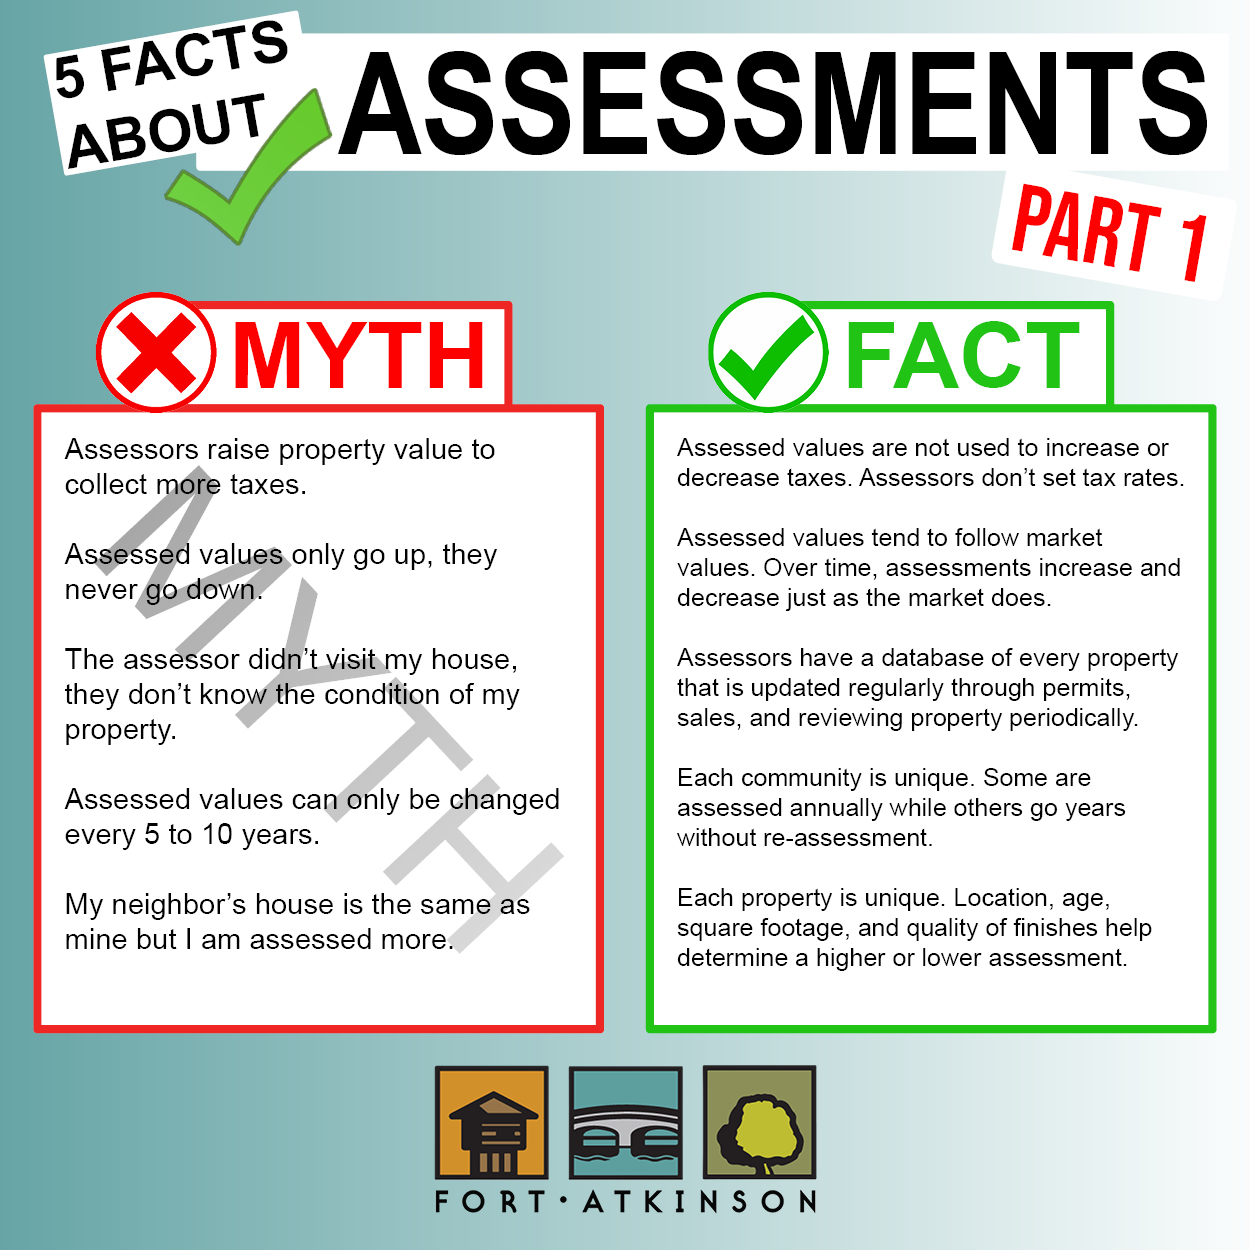 5 Facts about assessments PART 1